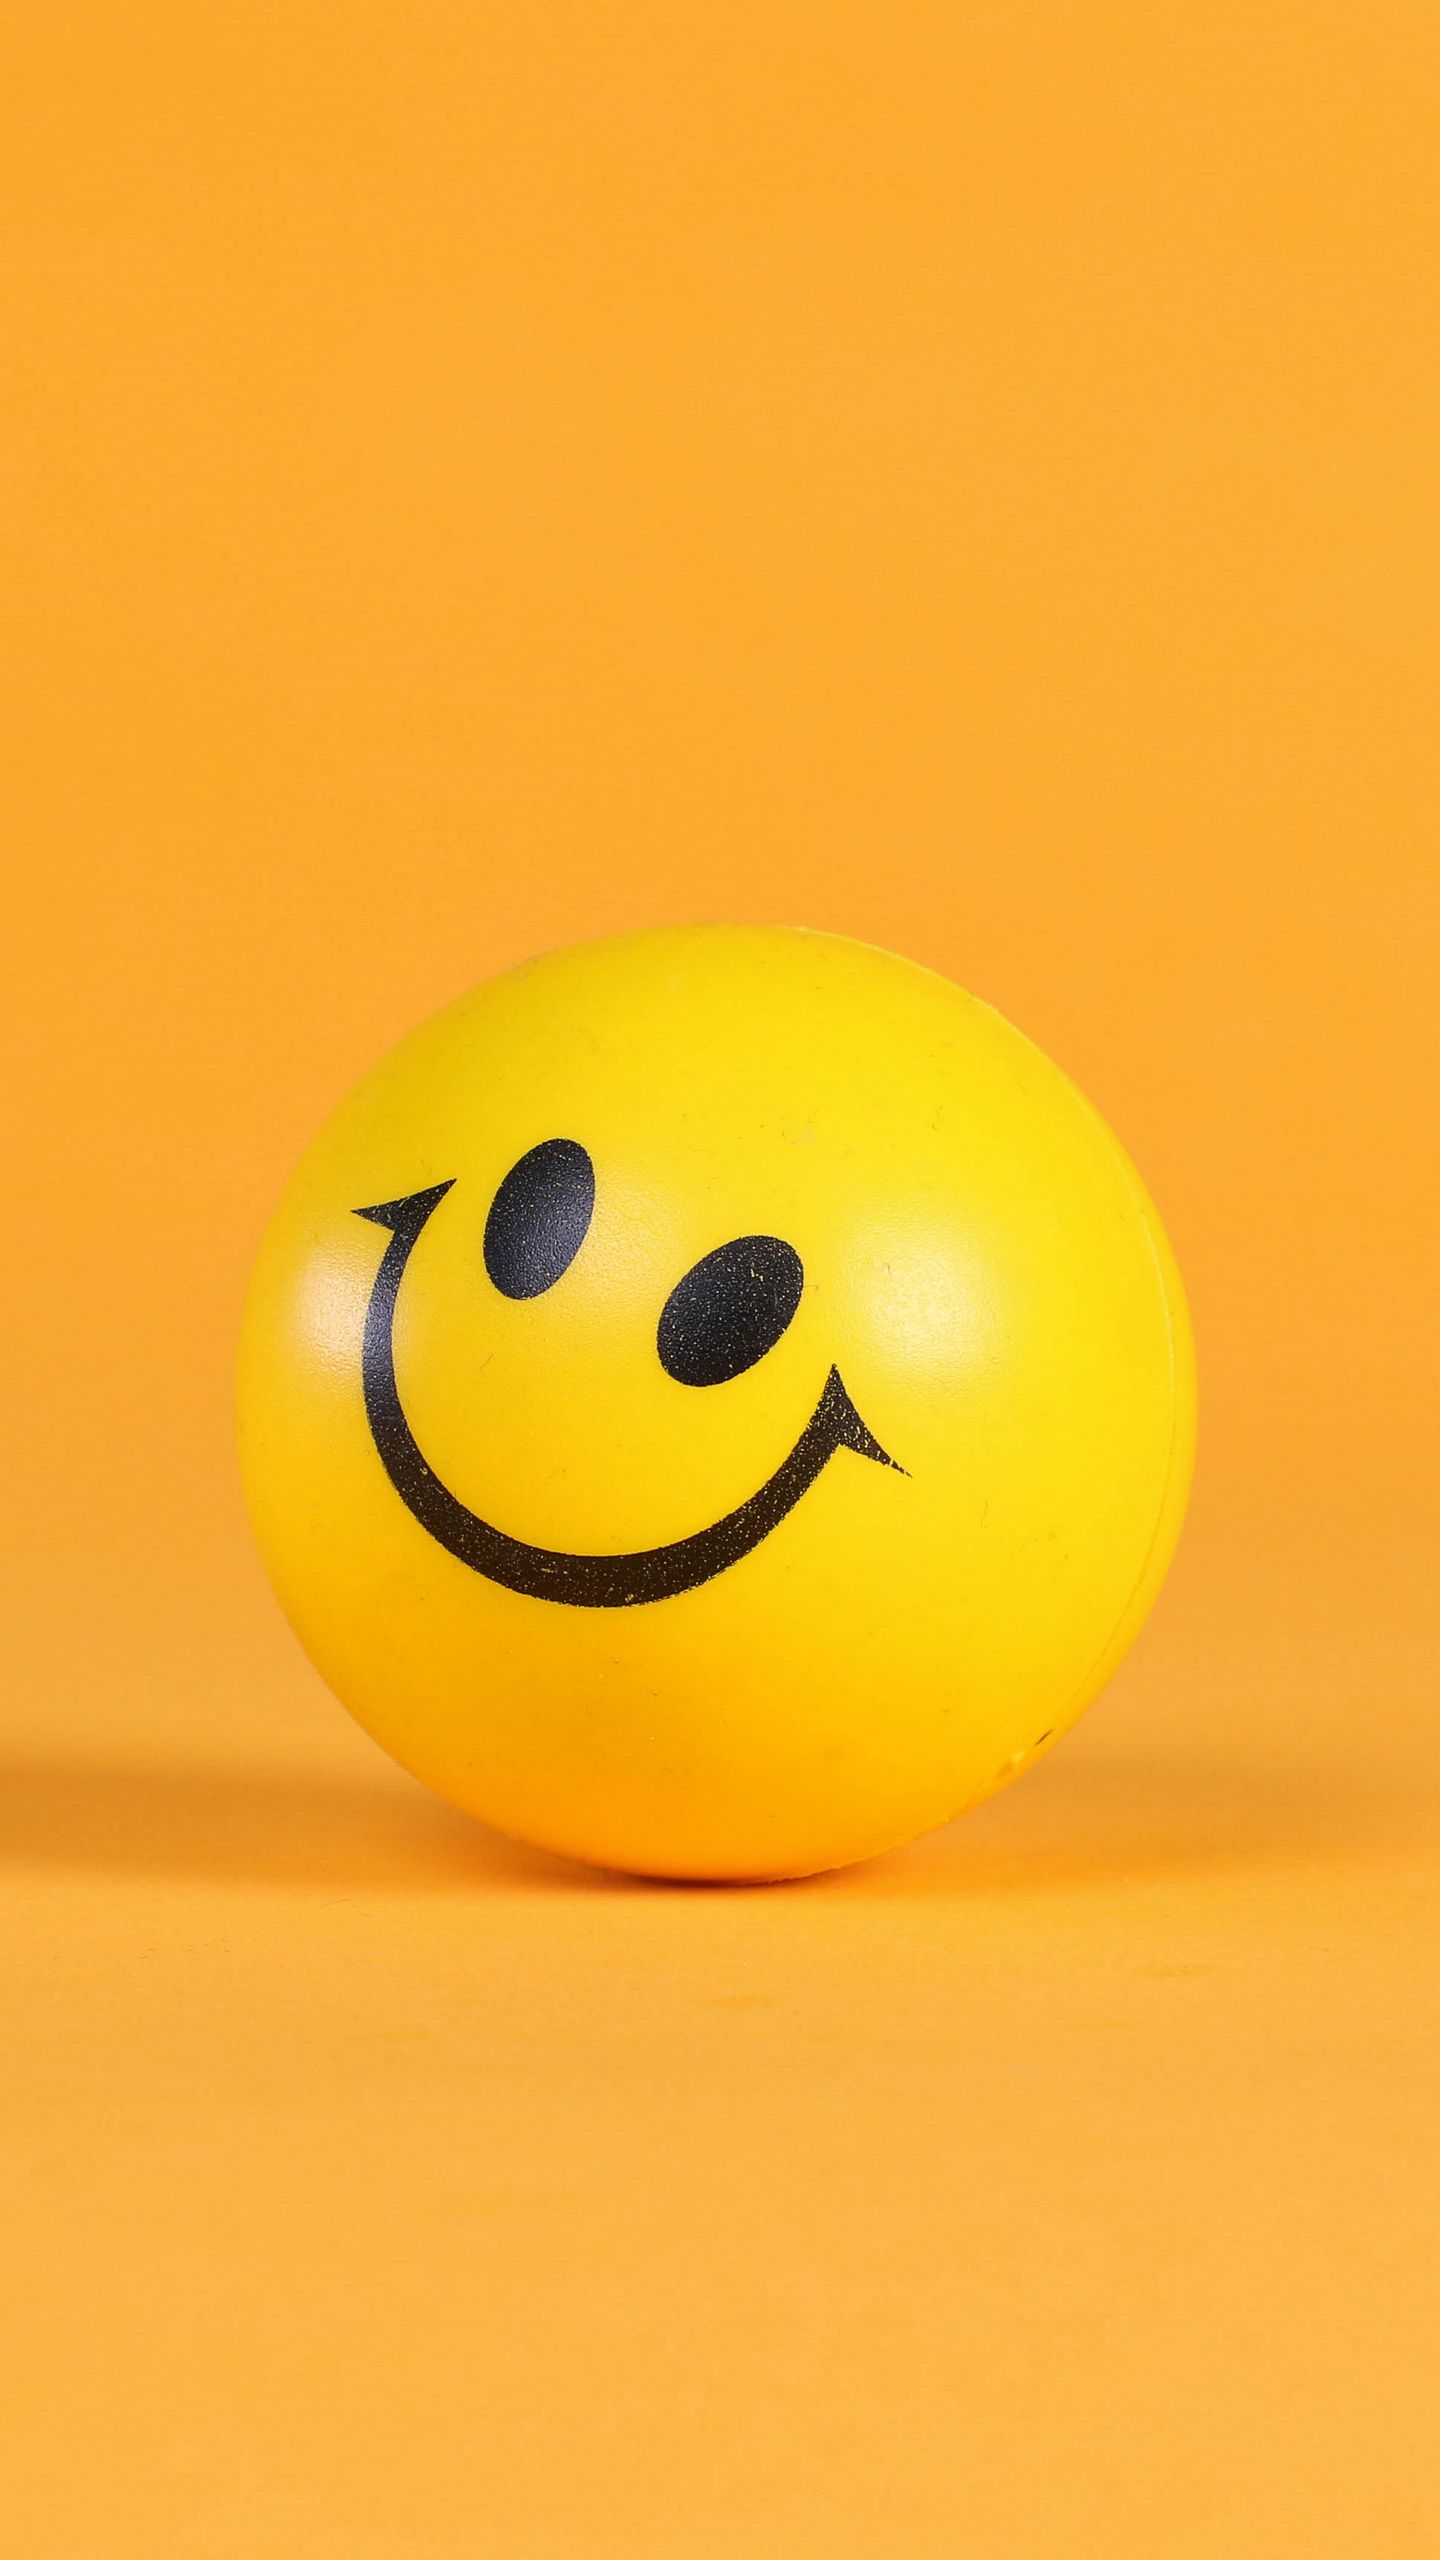 Download wallpaper 1440x2560 smile, smiley, ball, yellow qhd samsung galaxy  s6, s7, edge, note, lg g4 hd background